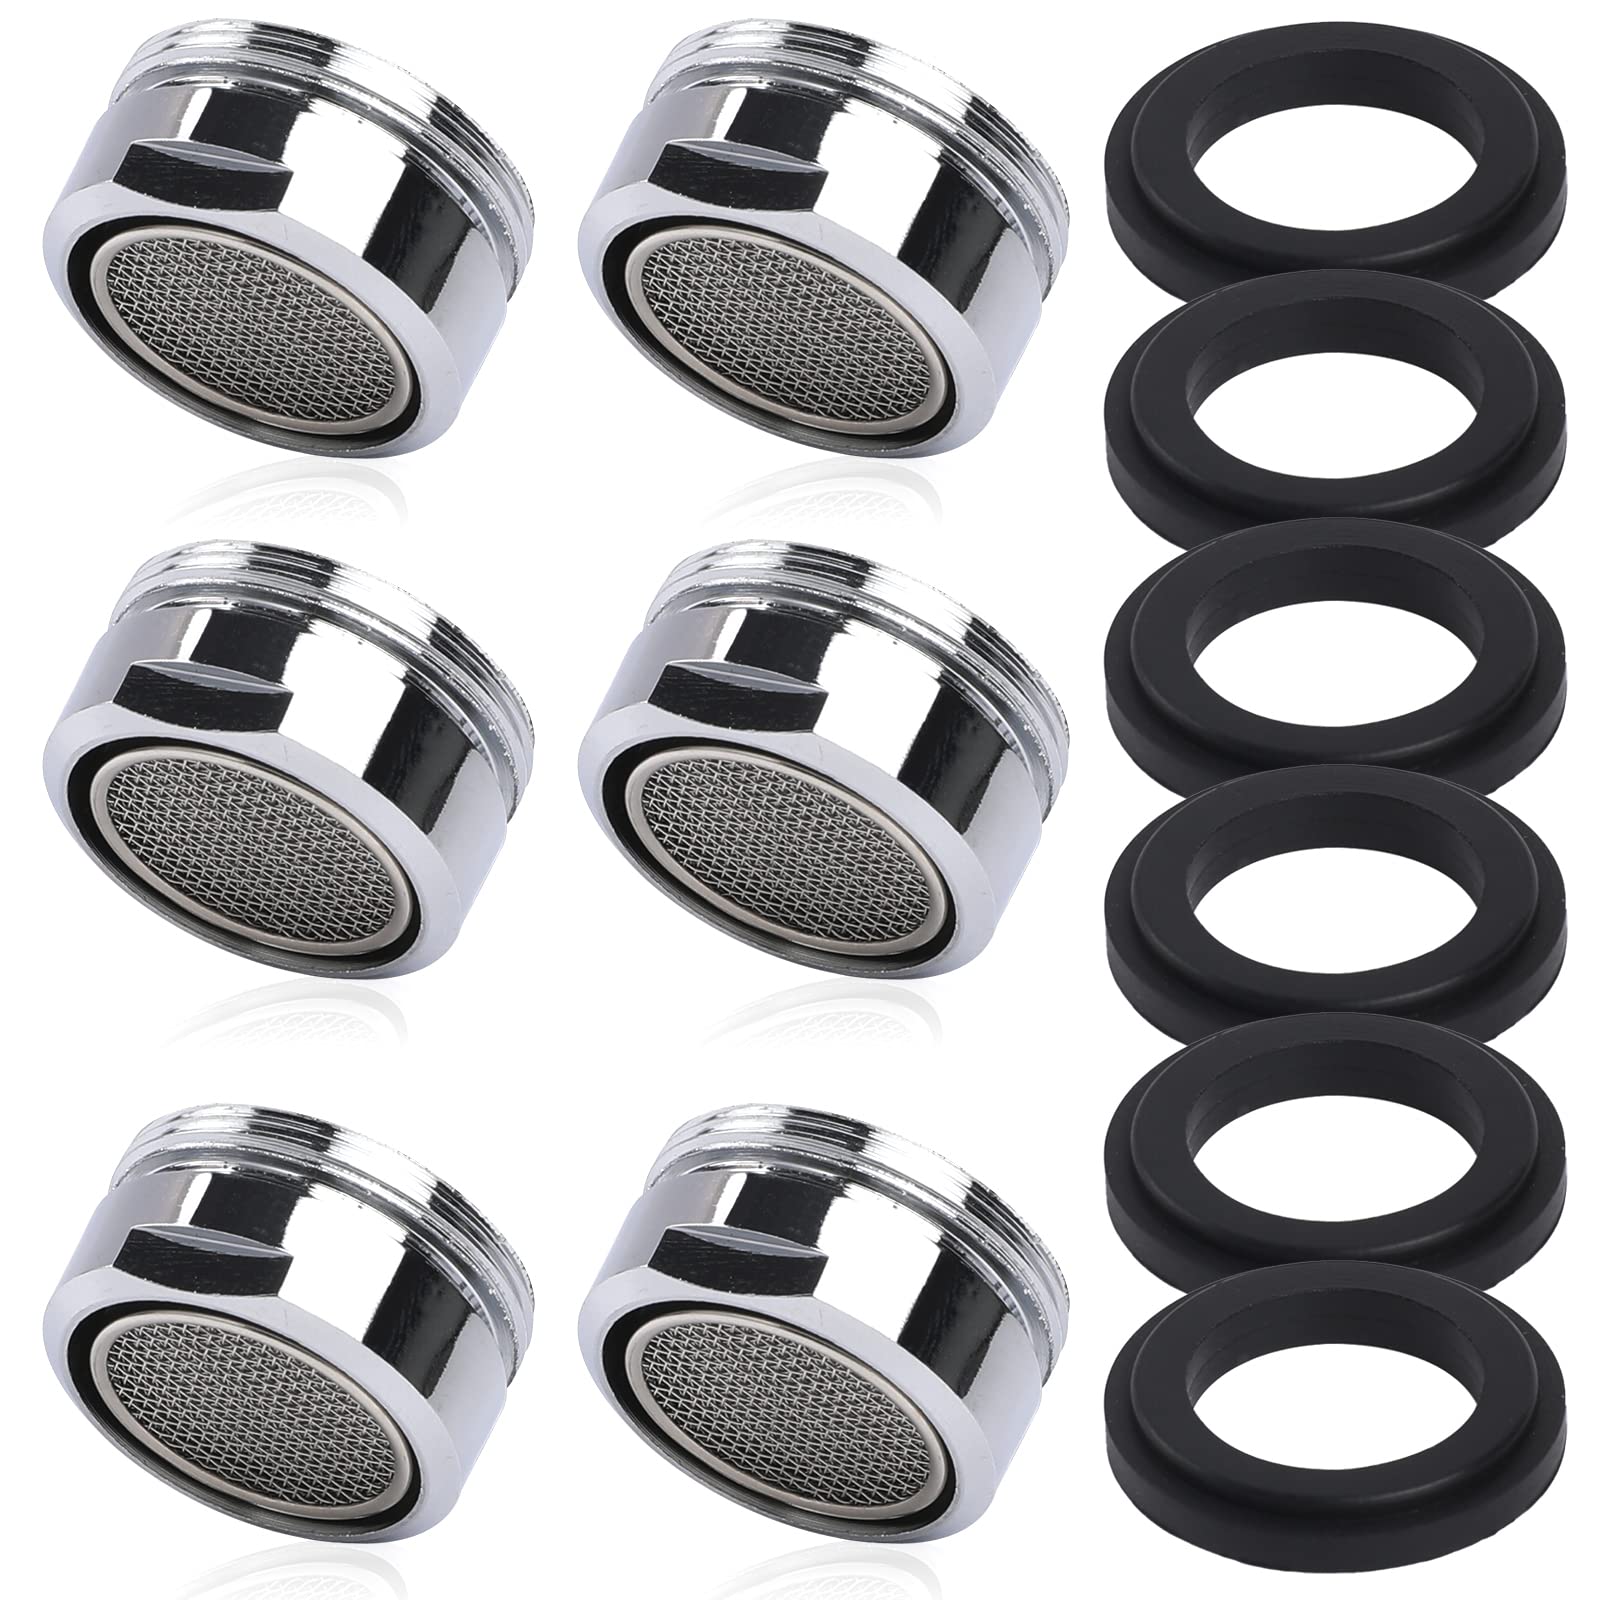 6 Pcs Faucet Aerator 15/16-Inch Male Threads Aerator 2.2 GPM Bathroom Sink Aerator Faucet Replacement Parts with Brass Shell Kitchen Sink Aerator Universal Size Faucet Filter with Gasket